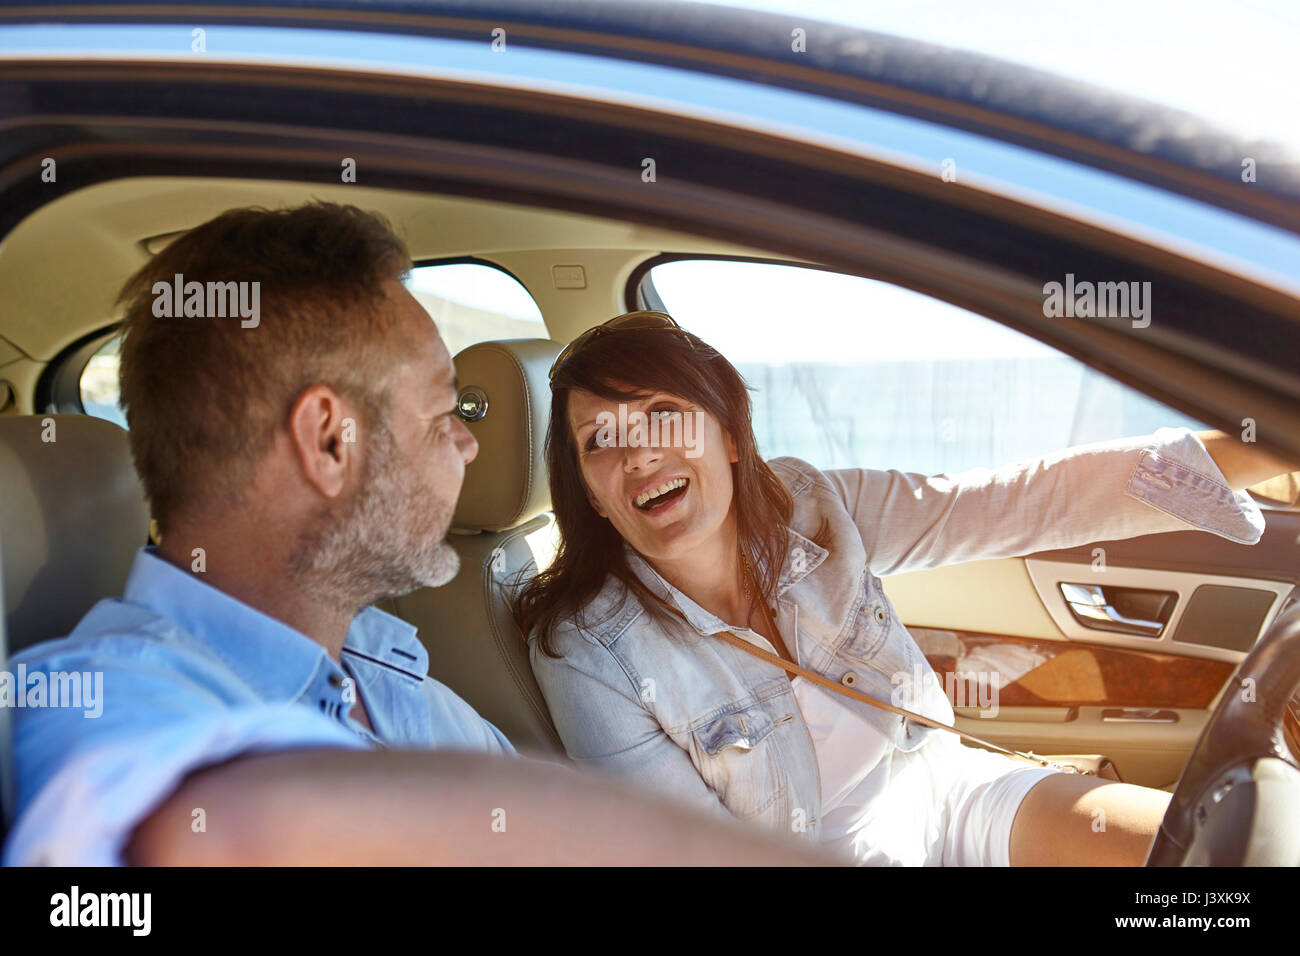 Couple in car, man driving, woman pointing ahead, laughing Stock Photo